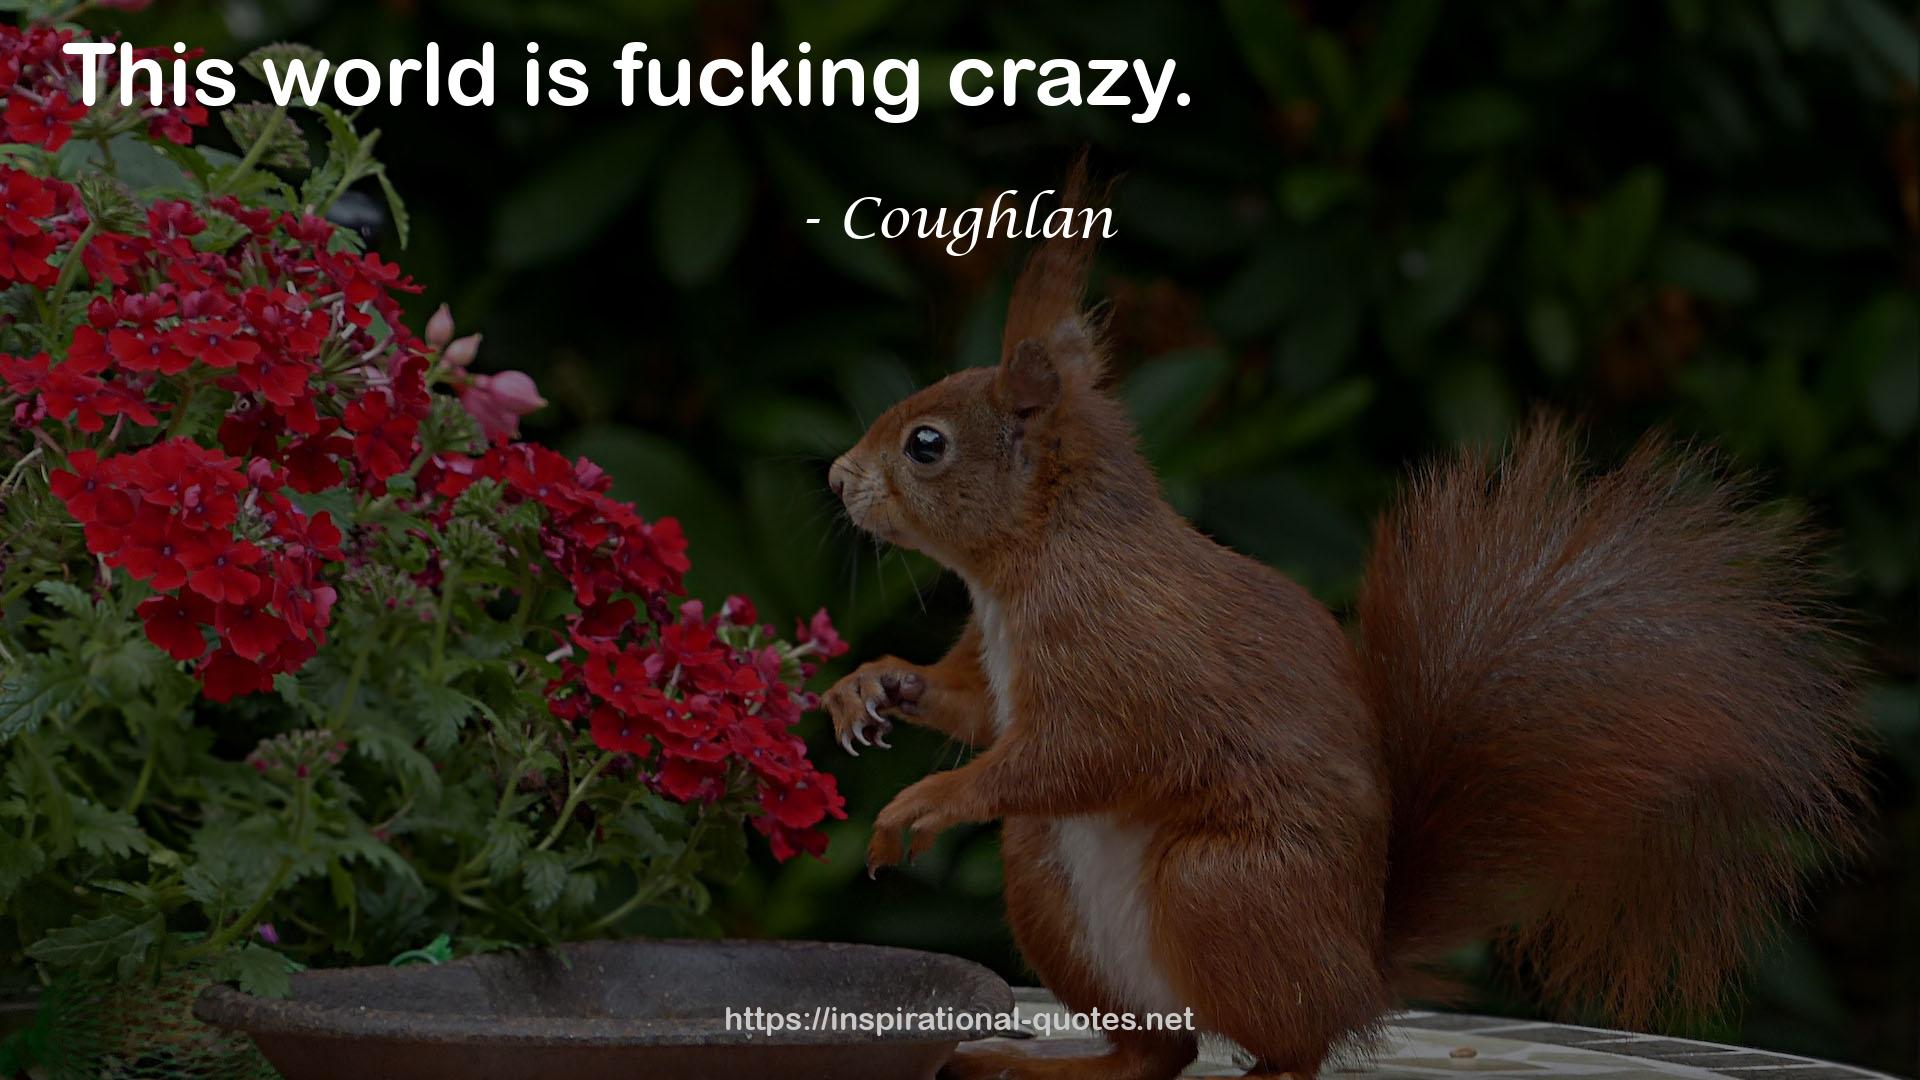 Coughlan QUOTES